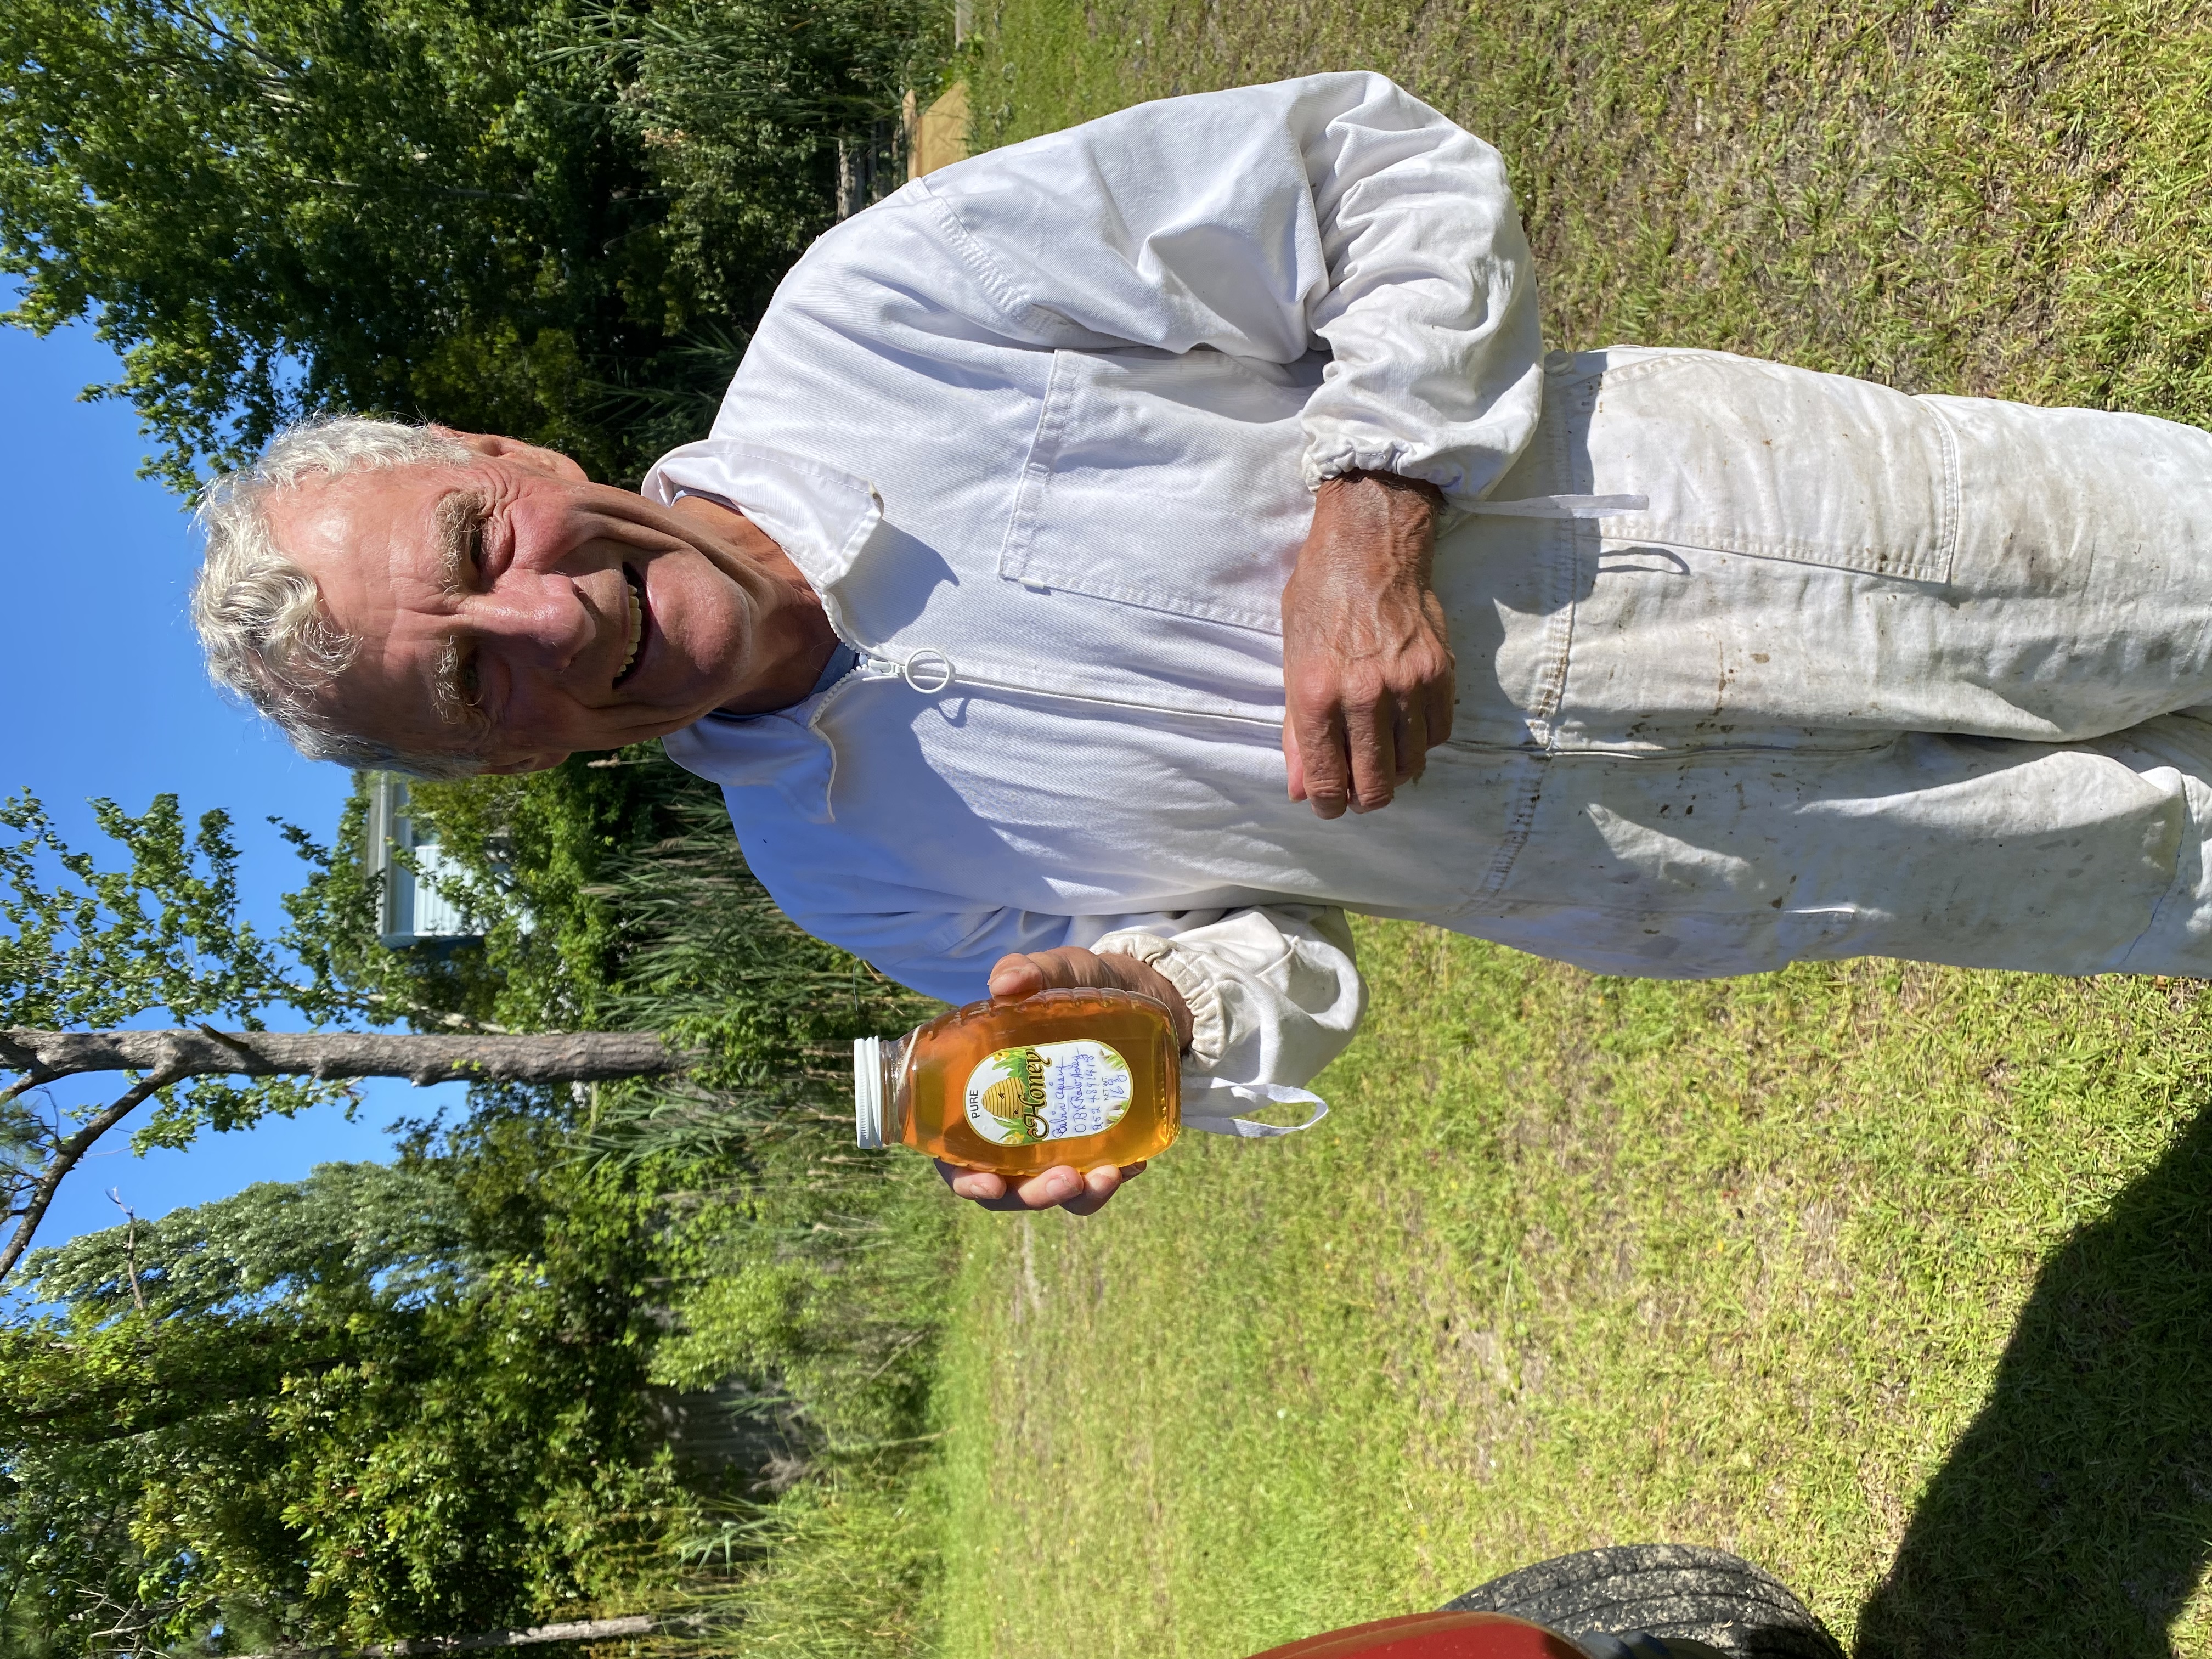 Don holding a jar of honey.